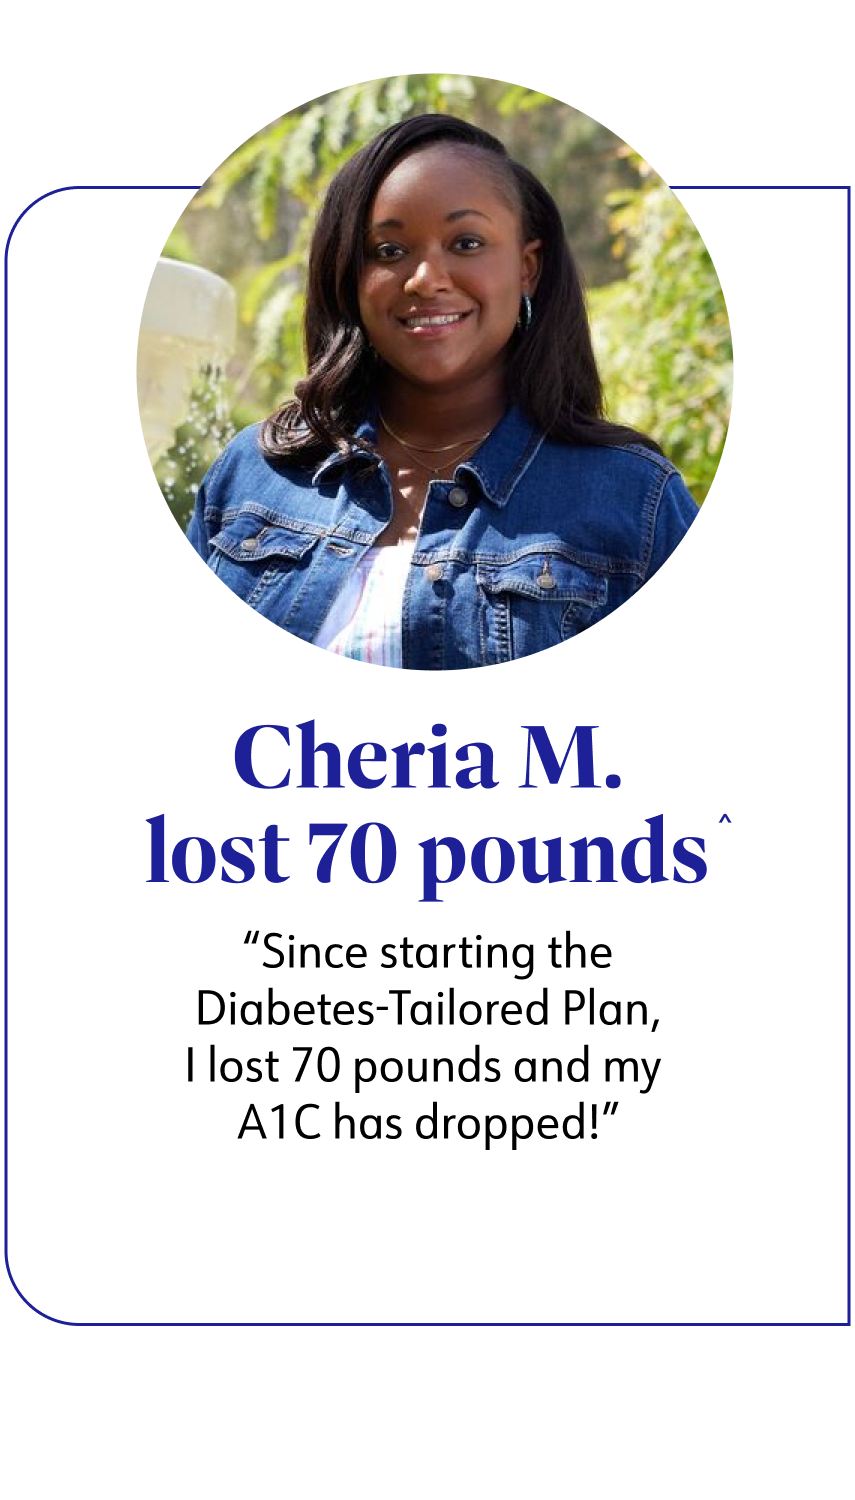 WW member Cheria after 70 pound weight loss